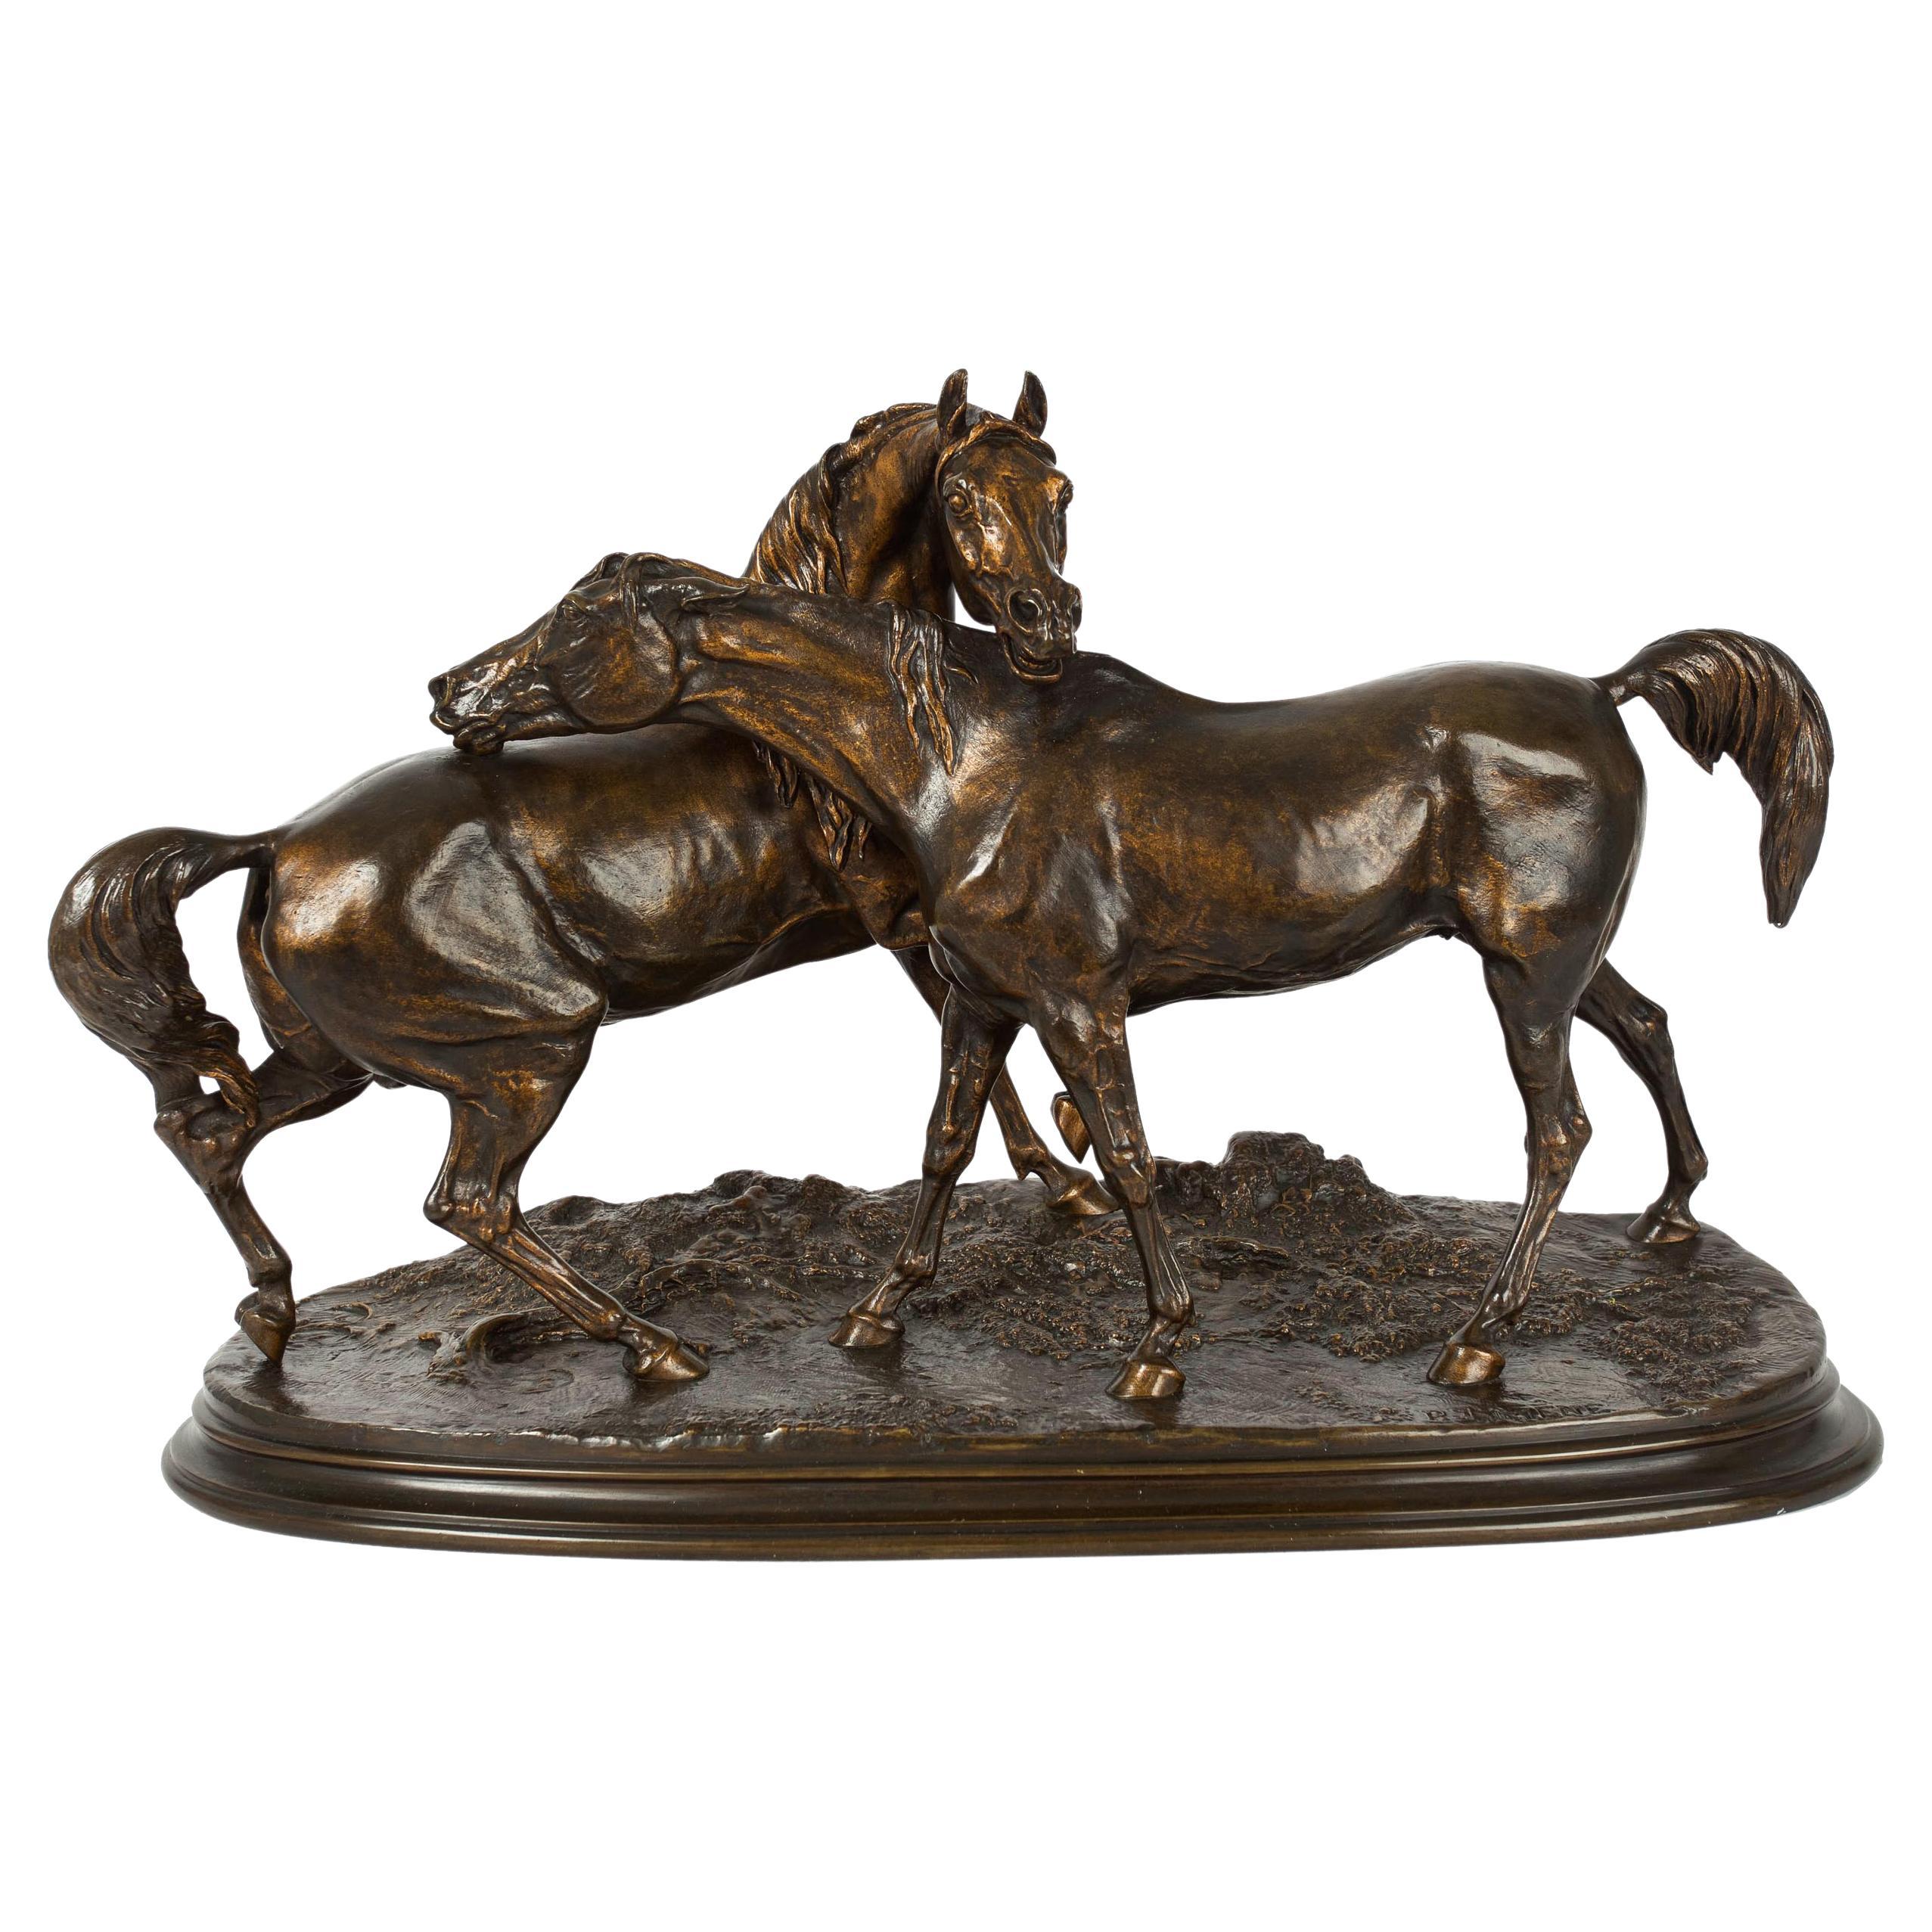 French Bronze Sculpture of Arabian Horses "L'accolade" After Pierre Jules Mêne